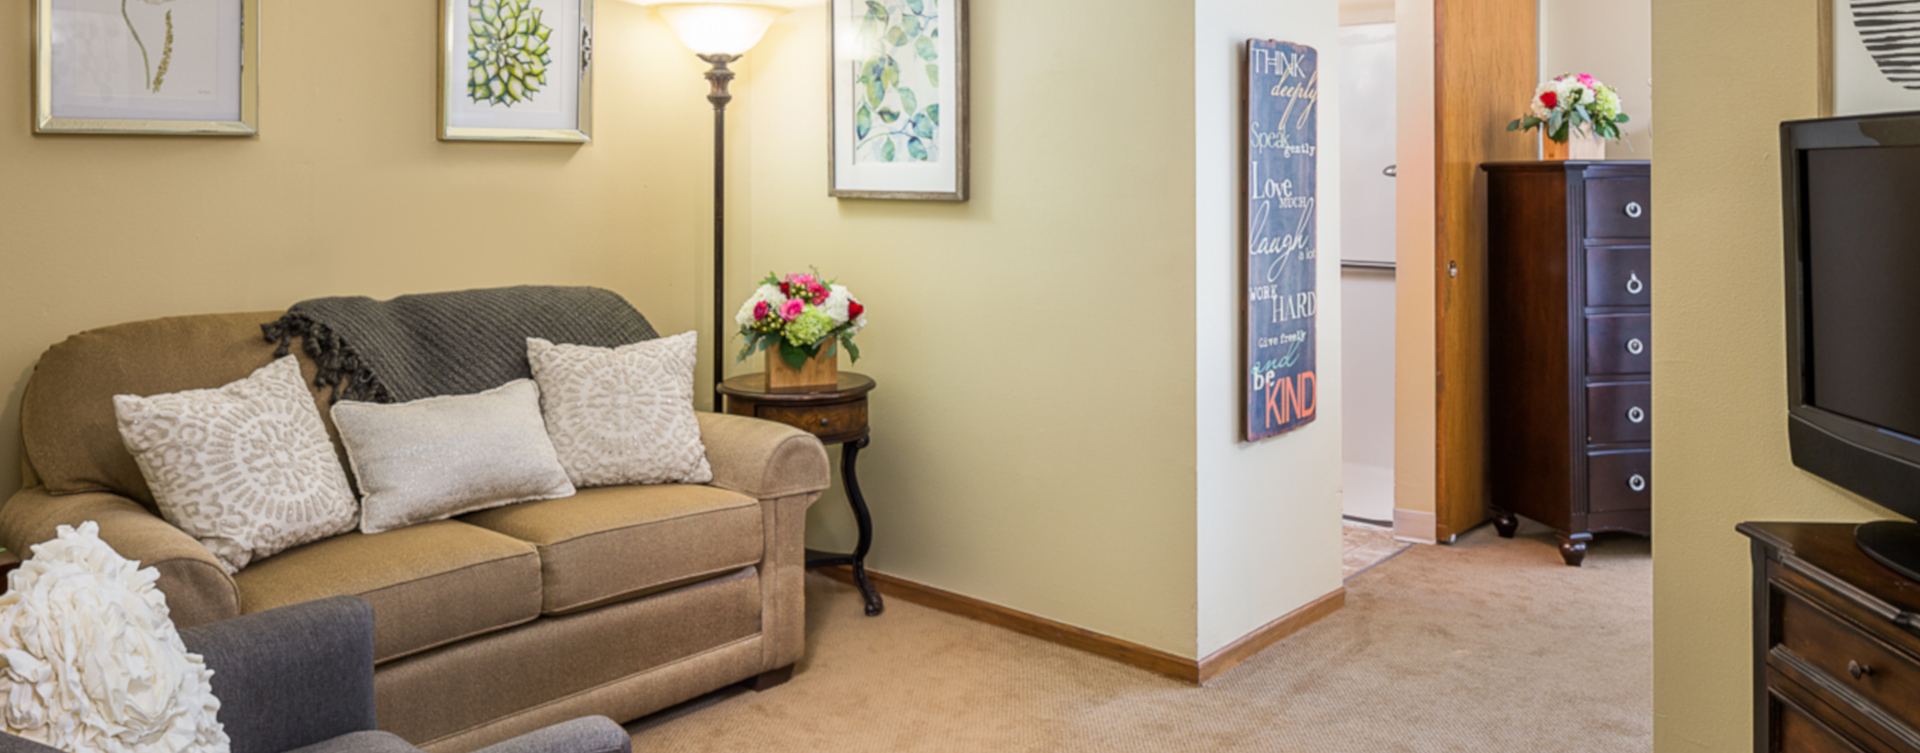 Enjoy senior friendly amenities, personal climate control and security in an apartment at Bickford of Grand Island